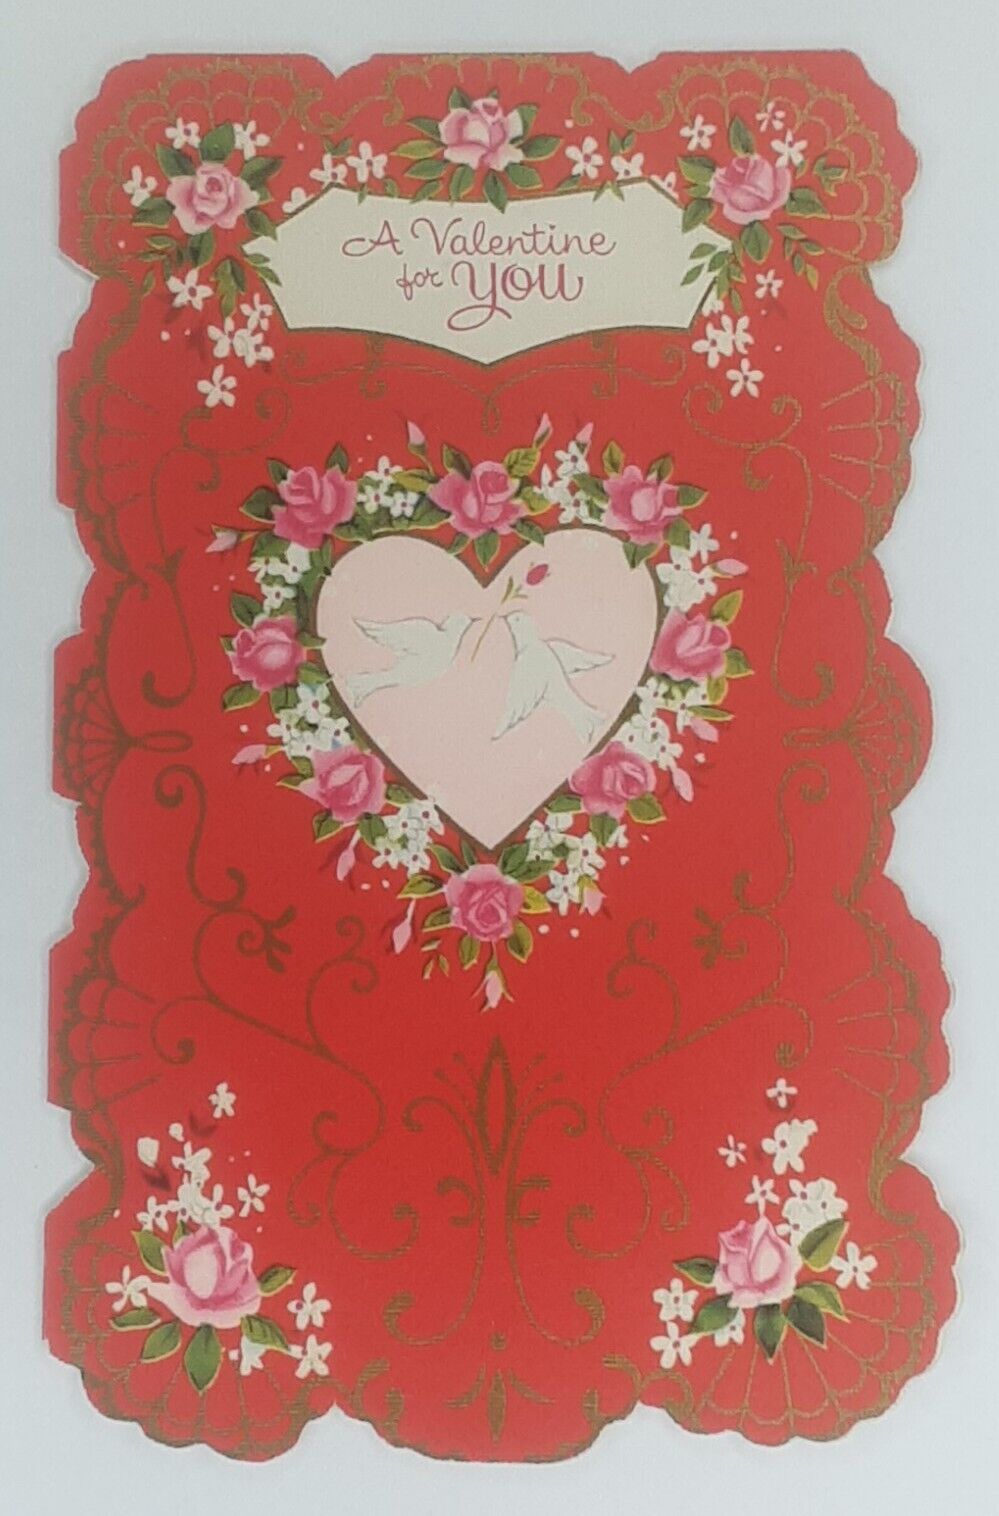 Valentine Greeting Card Buzza Cardozo Somebody Who Means So Much 1940s Greeting